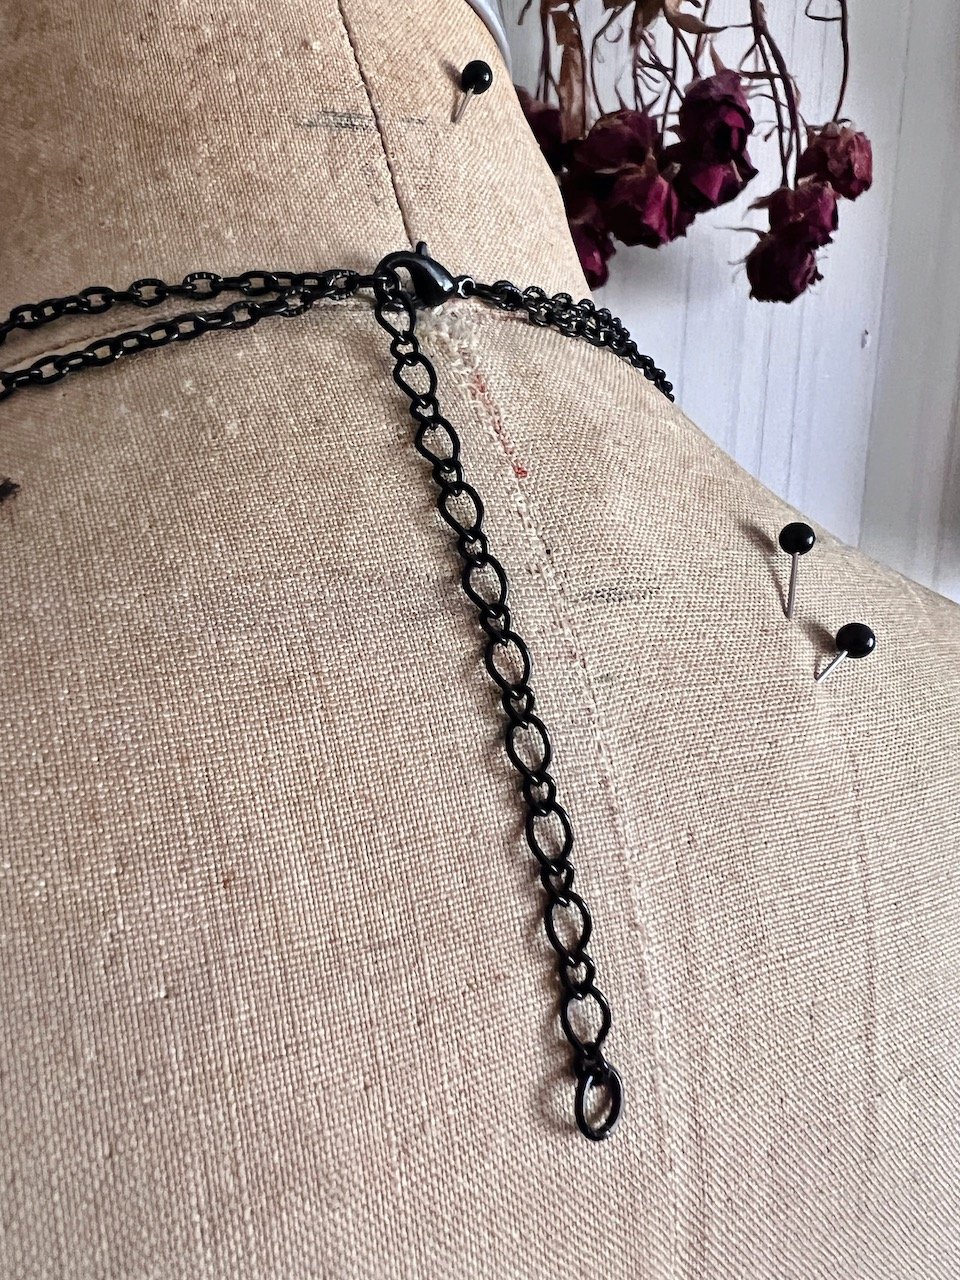 Our Widow Blackened Vertebrae Necklace and Earring Set - Long Lariat Spike Black Chain Choker Necklace